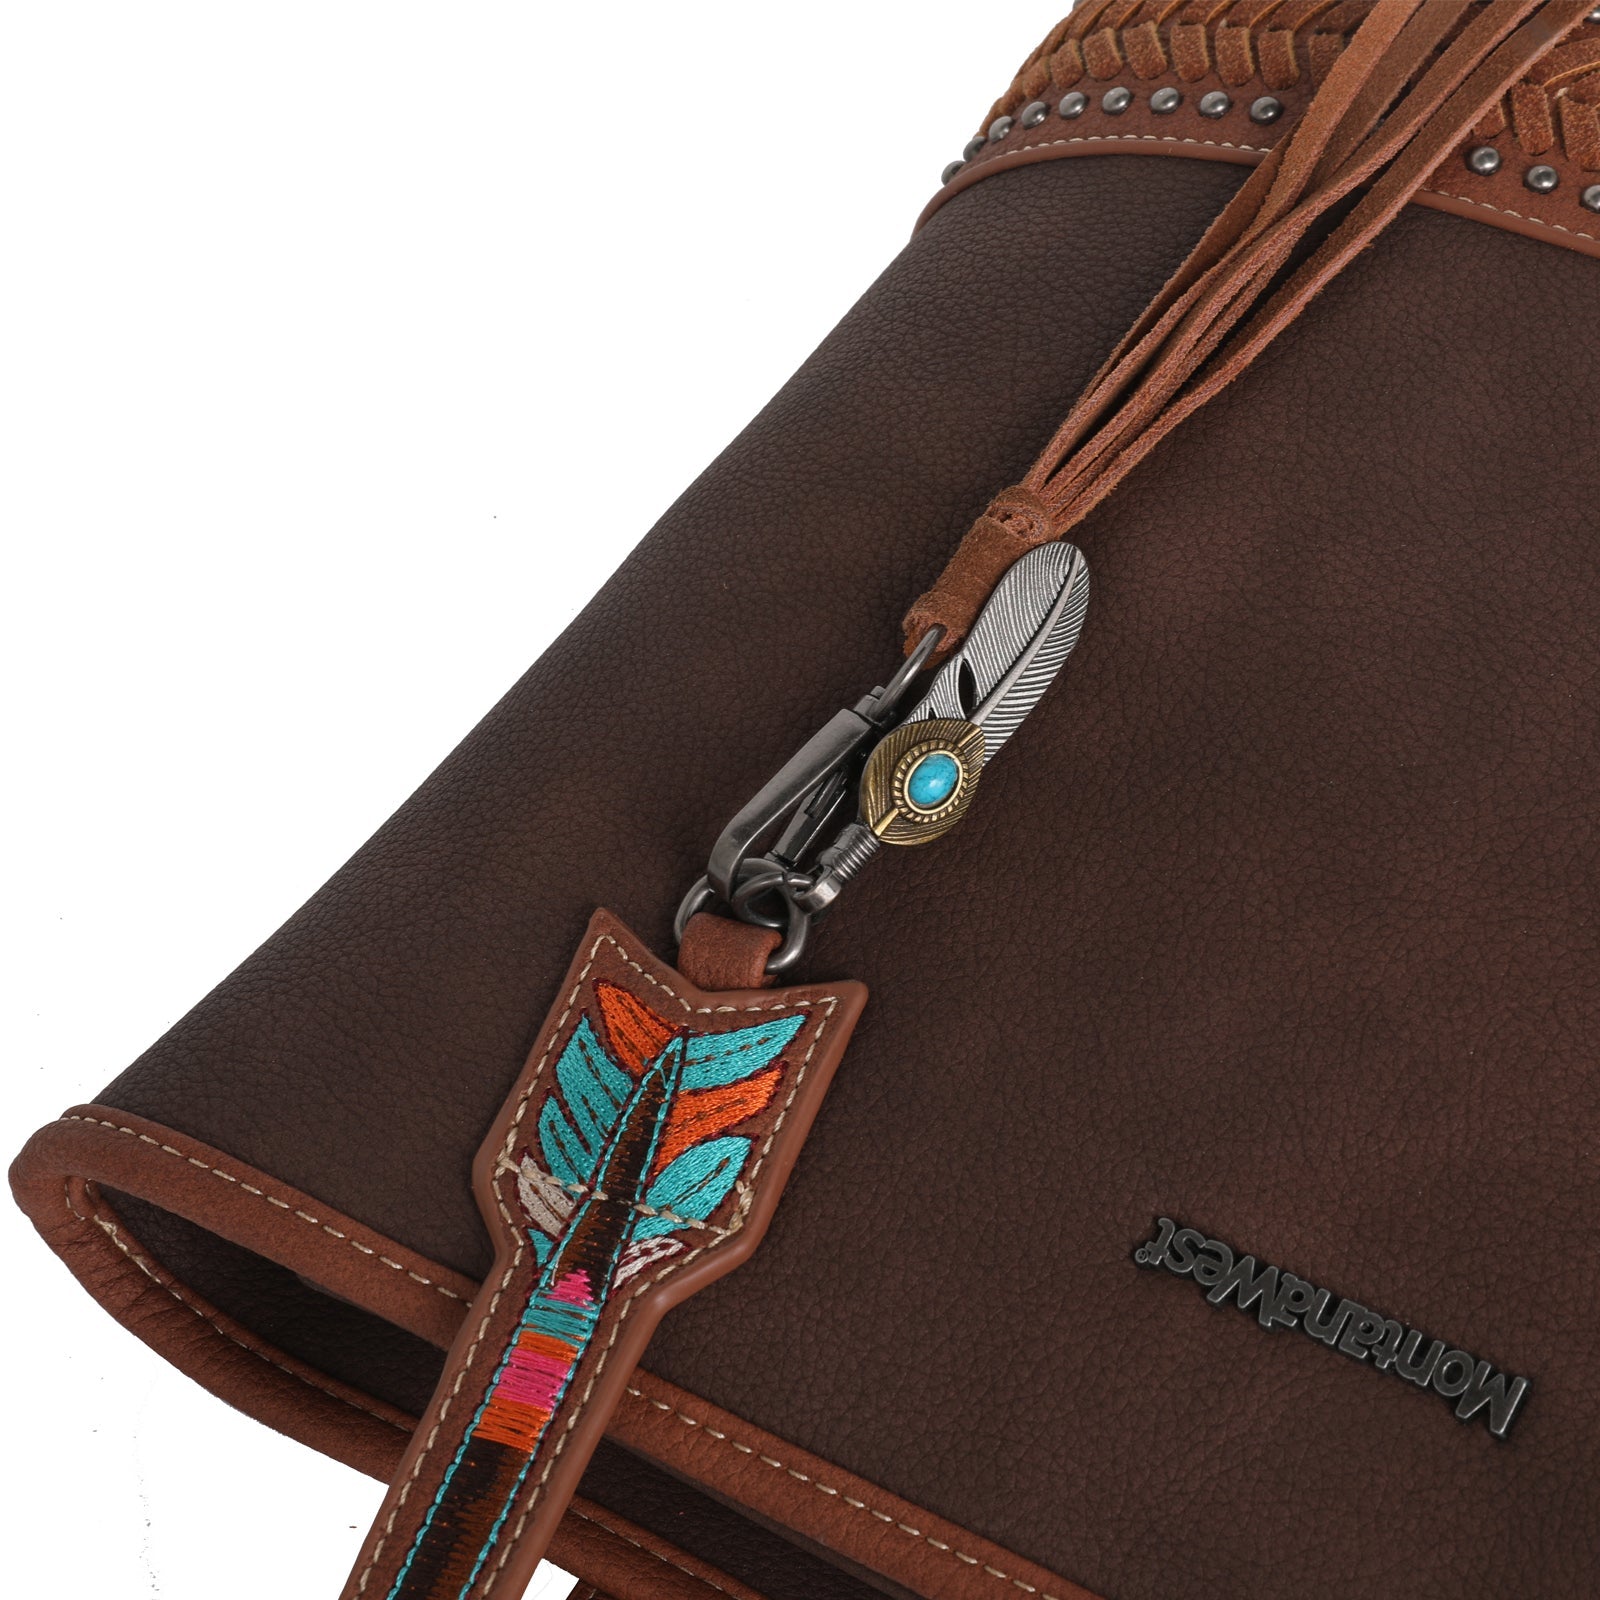 Montana West Concho Concealed Carry Tote - Montana West World